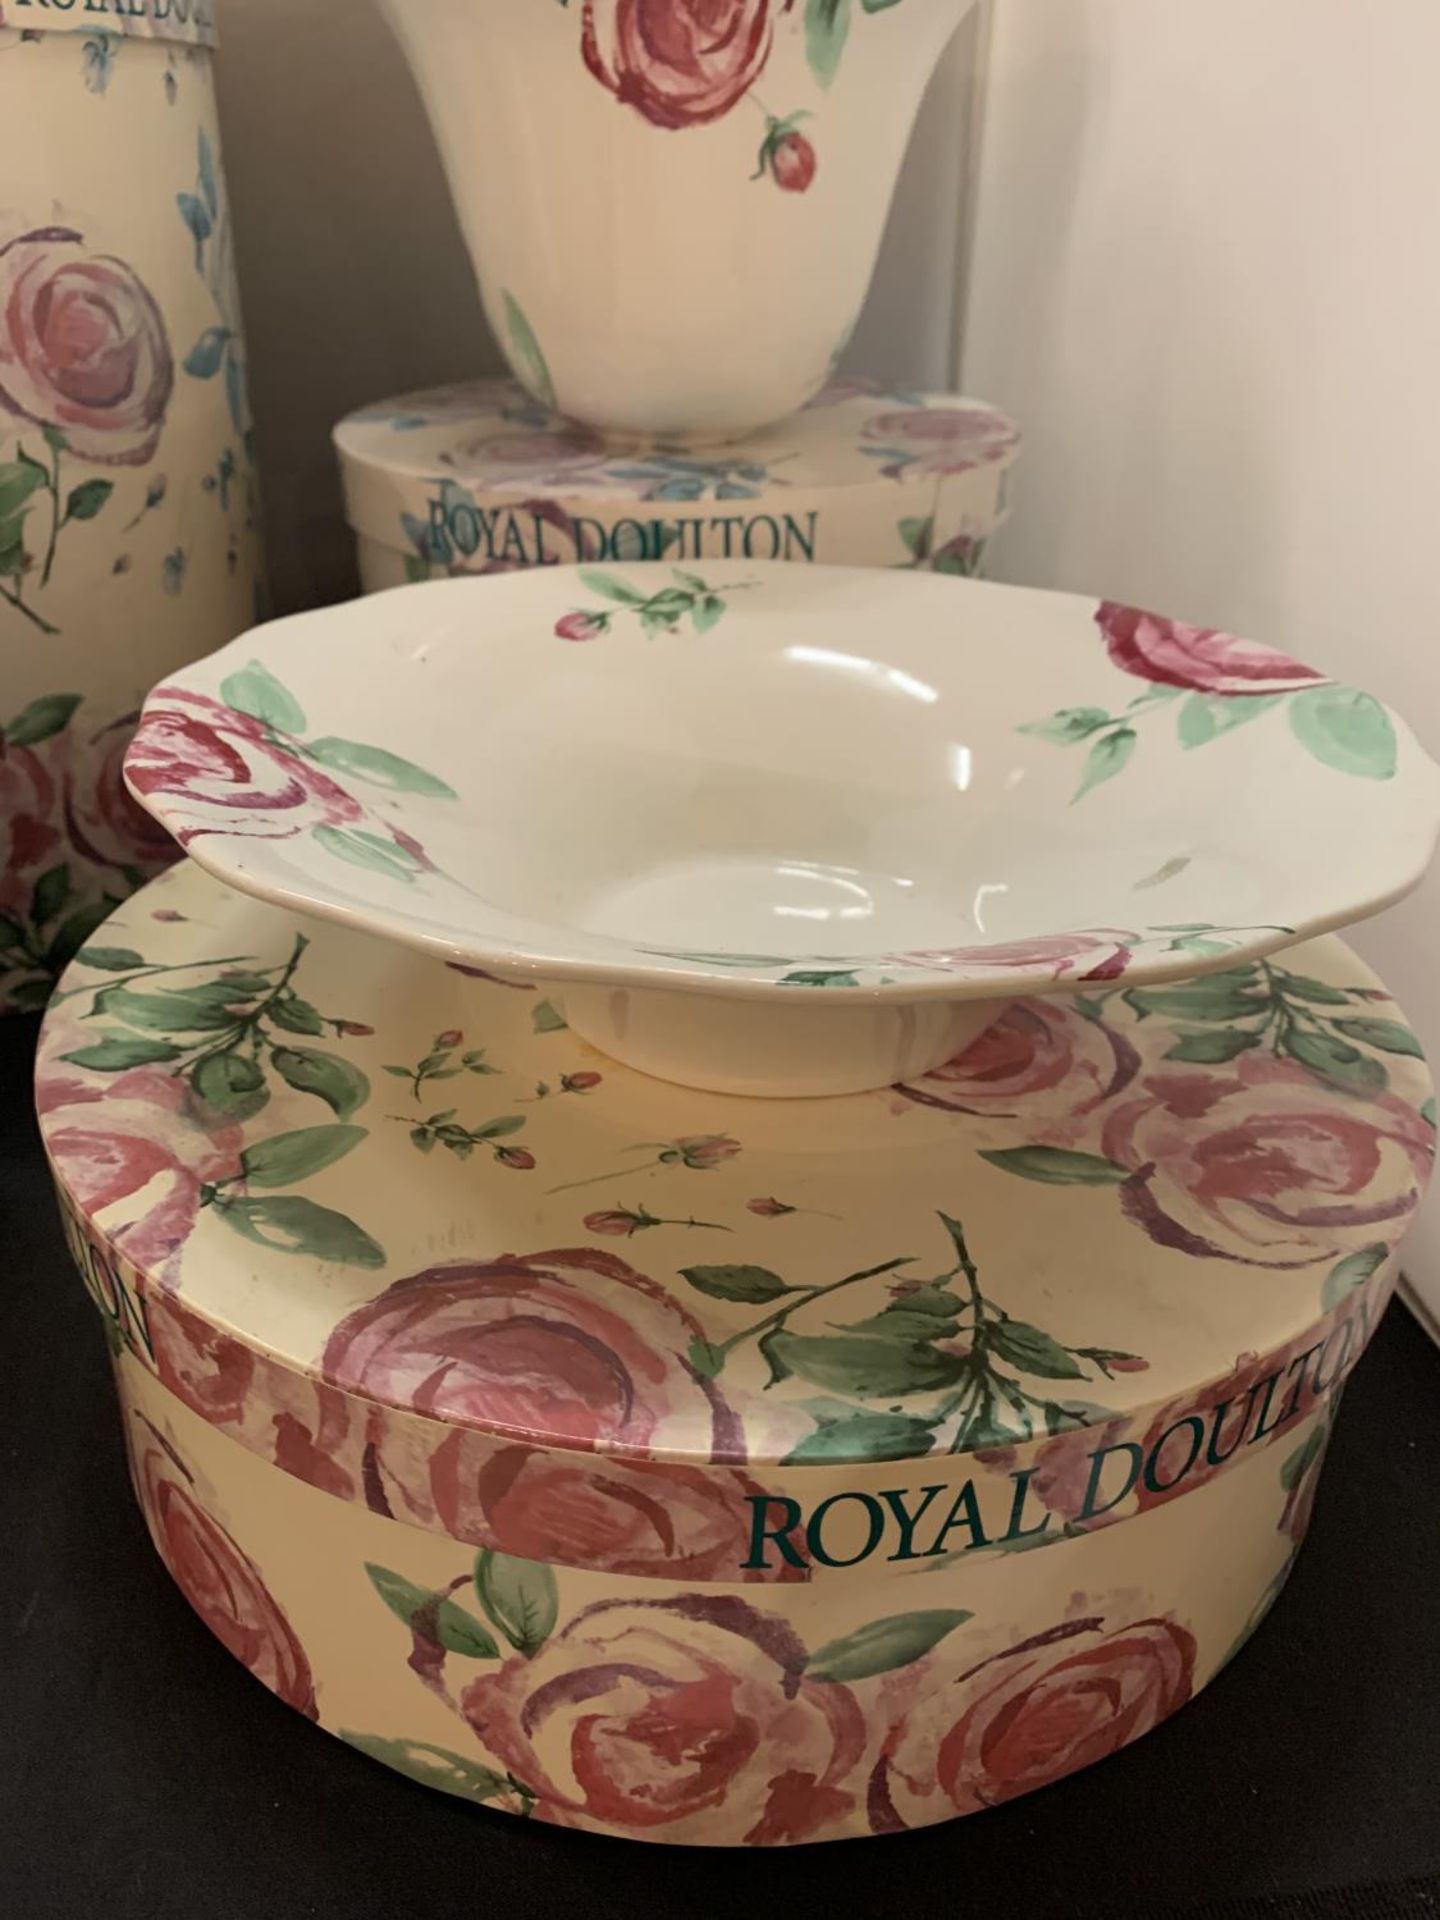 THREE VARIOUS ROYAL DOULTON ROSE CLOUDS ITEMS WITH PRESENTATION BOXES TO INCLUDE A VASE, PLANTER AND - Image 5 of 10